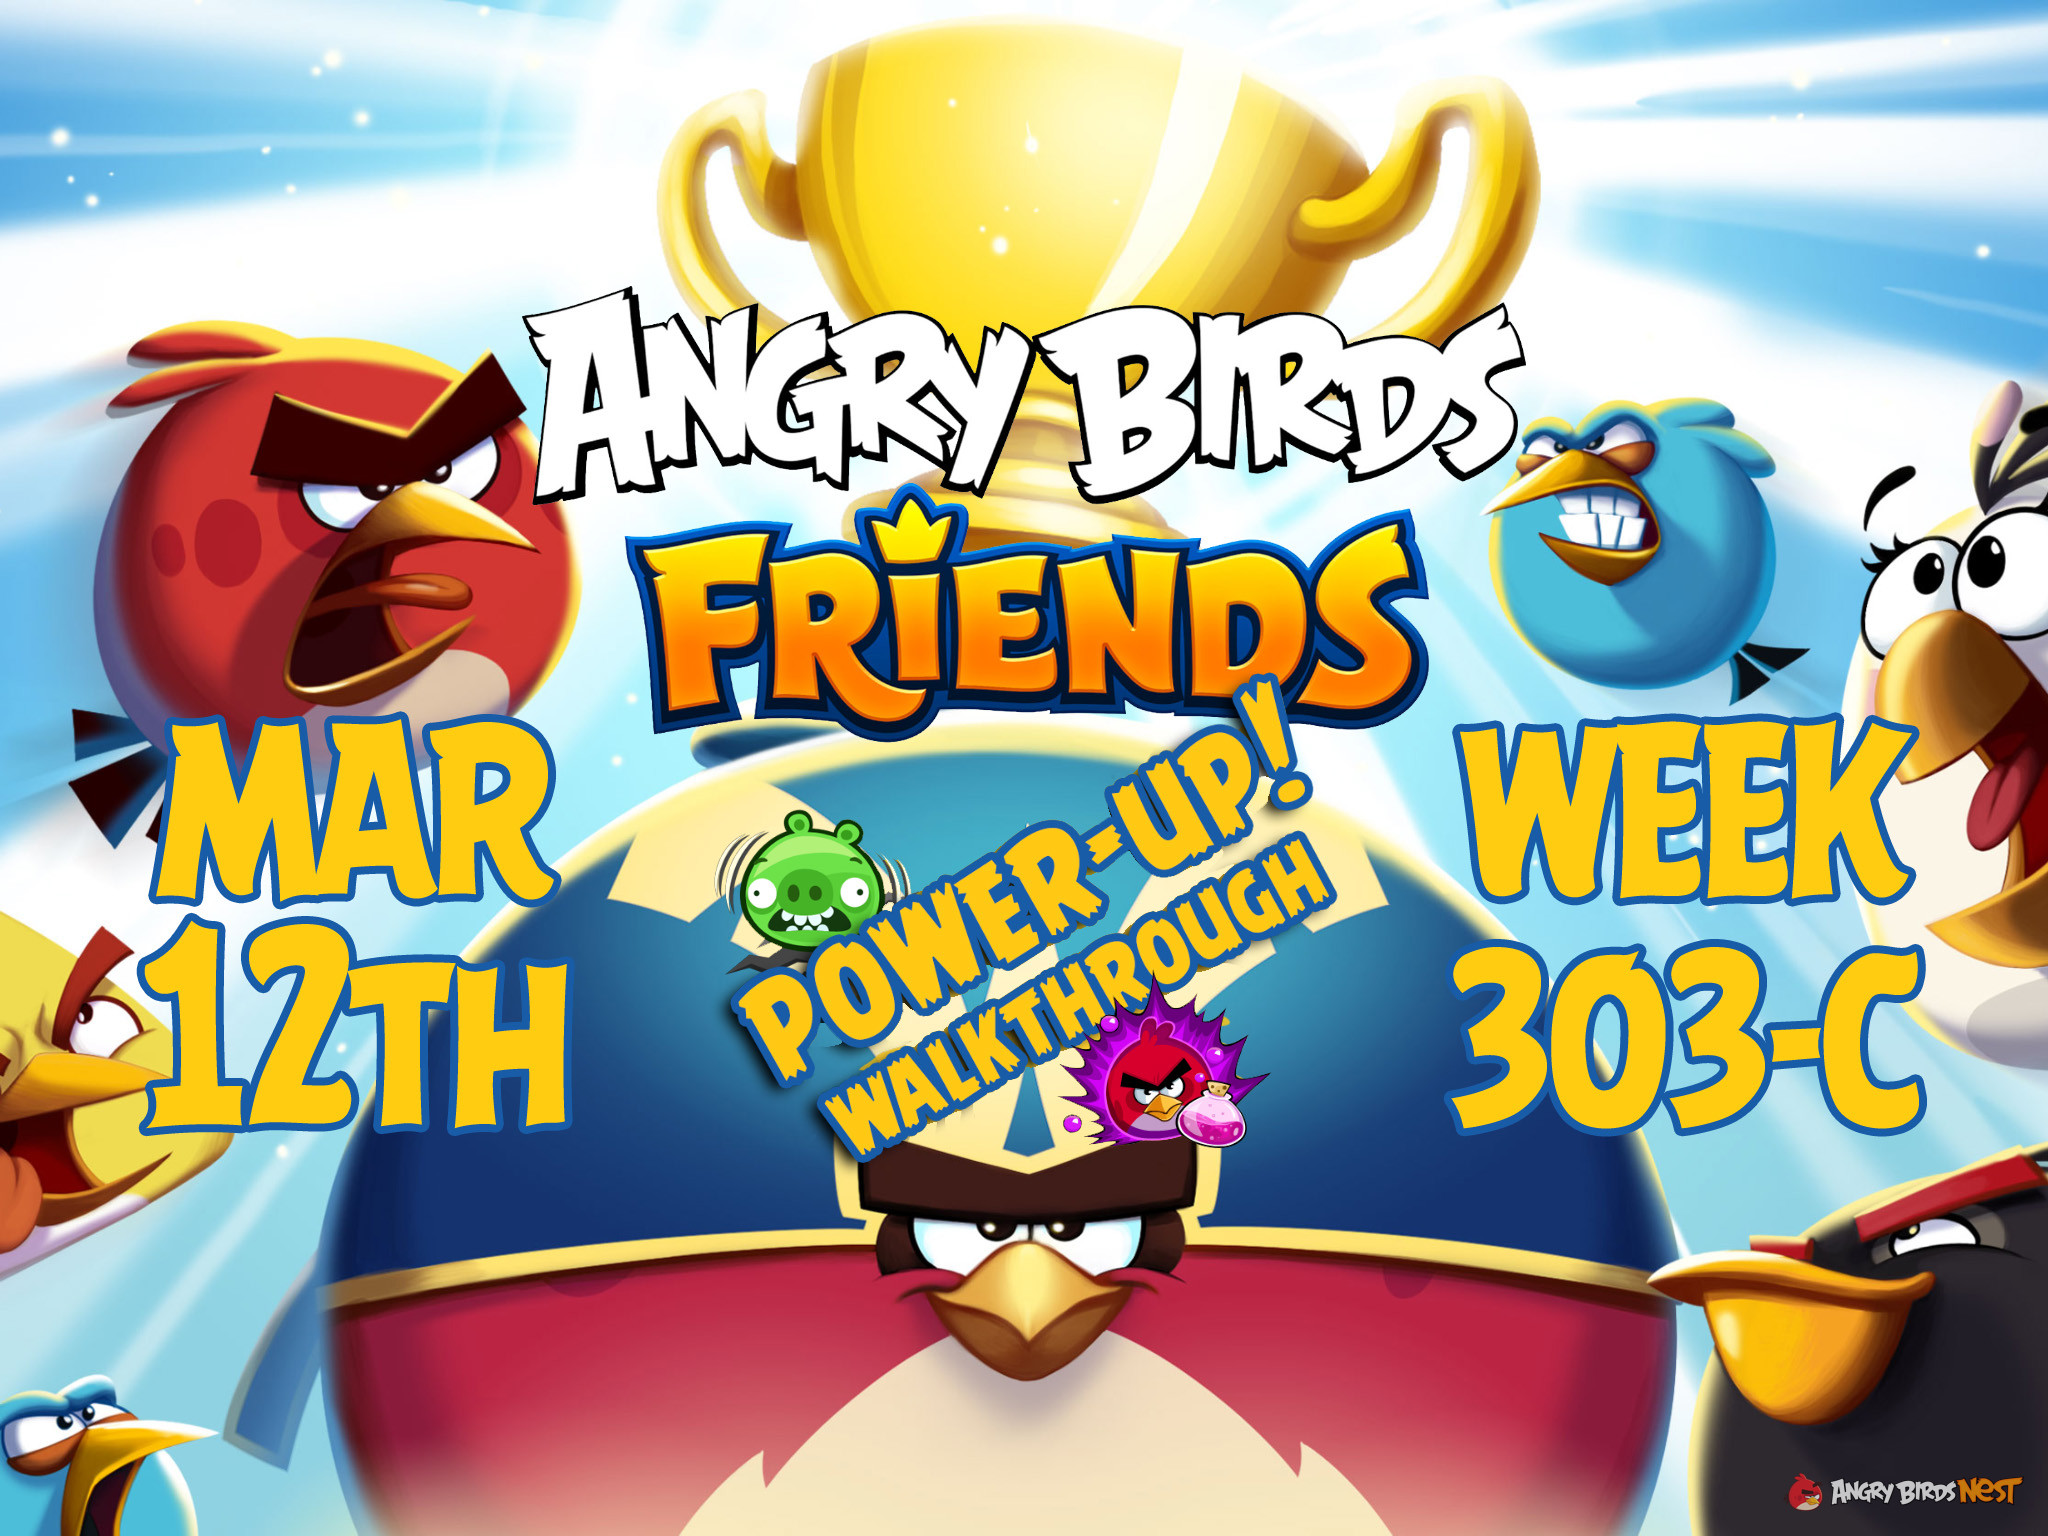 Angry Birds Friends Tournament Week 303-C Feature Image PU